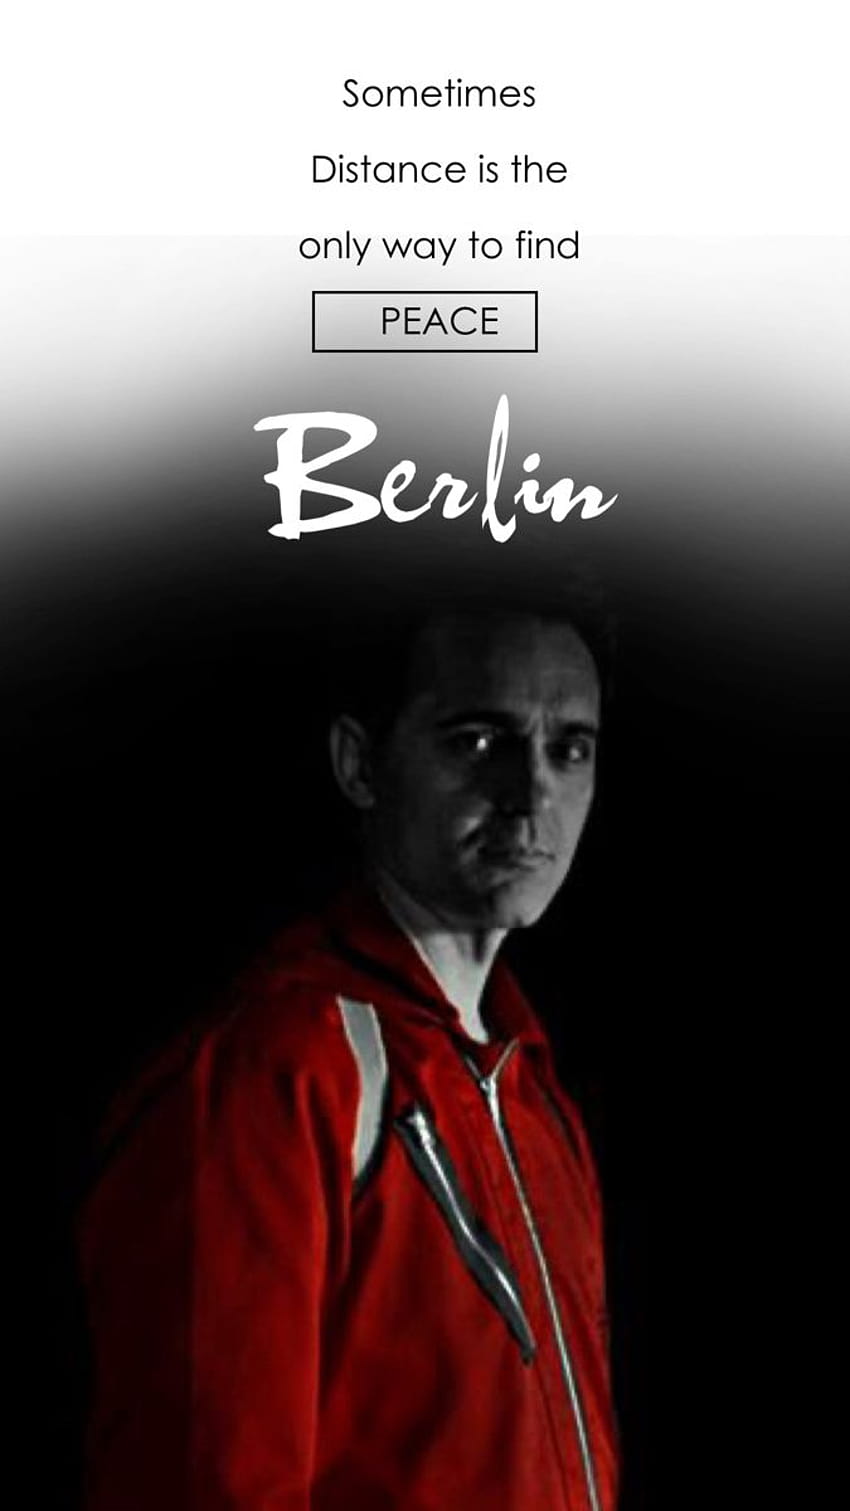 Sometimes distance is the only way to find peace., iphone berlin money heist HD phone wallpaper